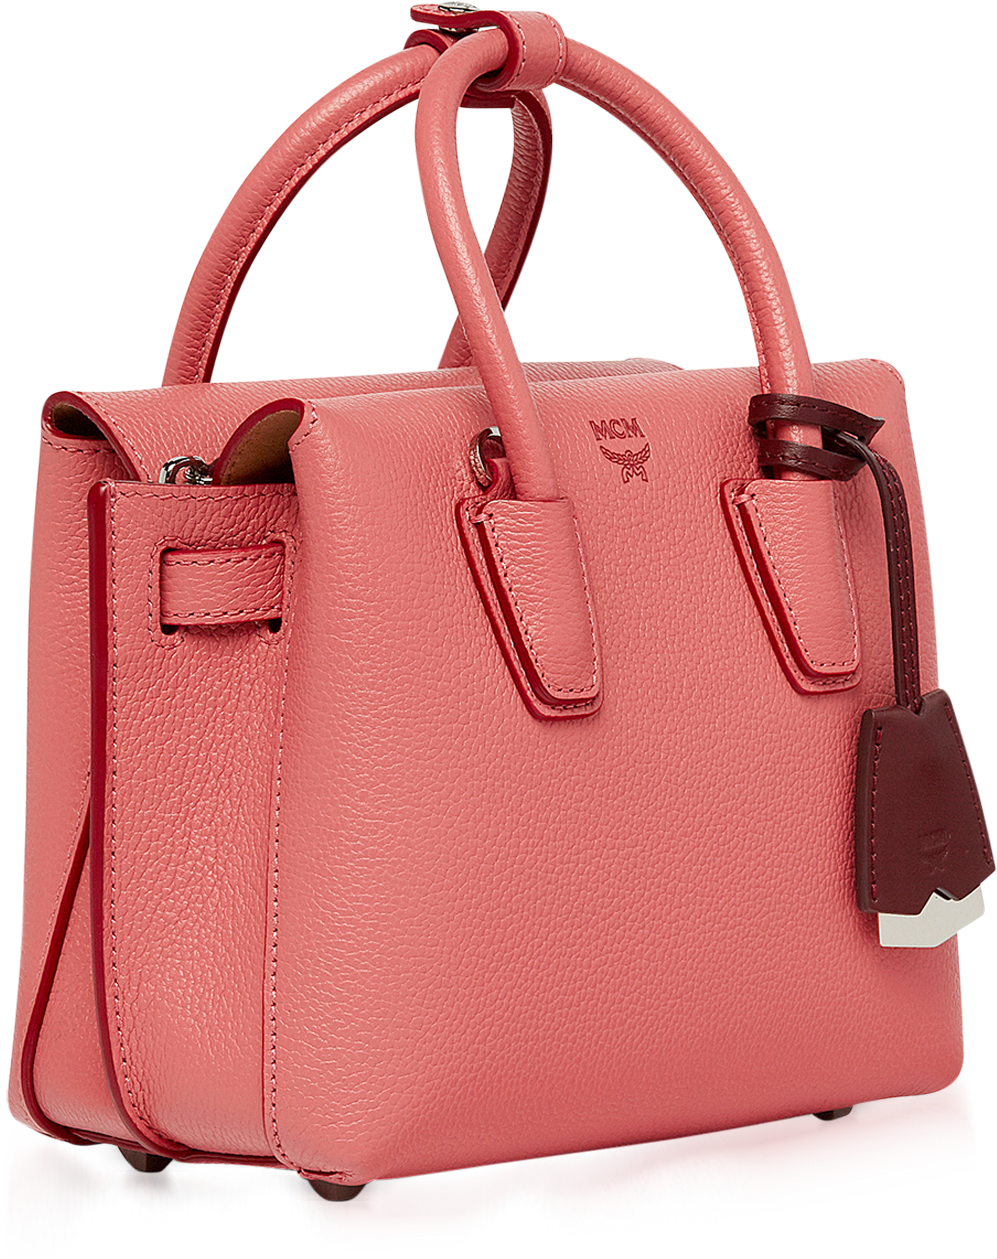 MCM Milla Coral Pink Park Avenue Leather Mini Tote at FORZIERI